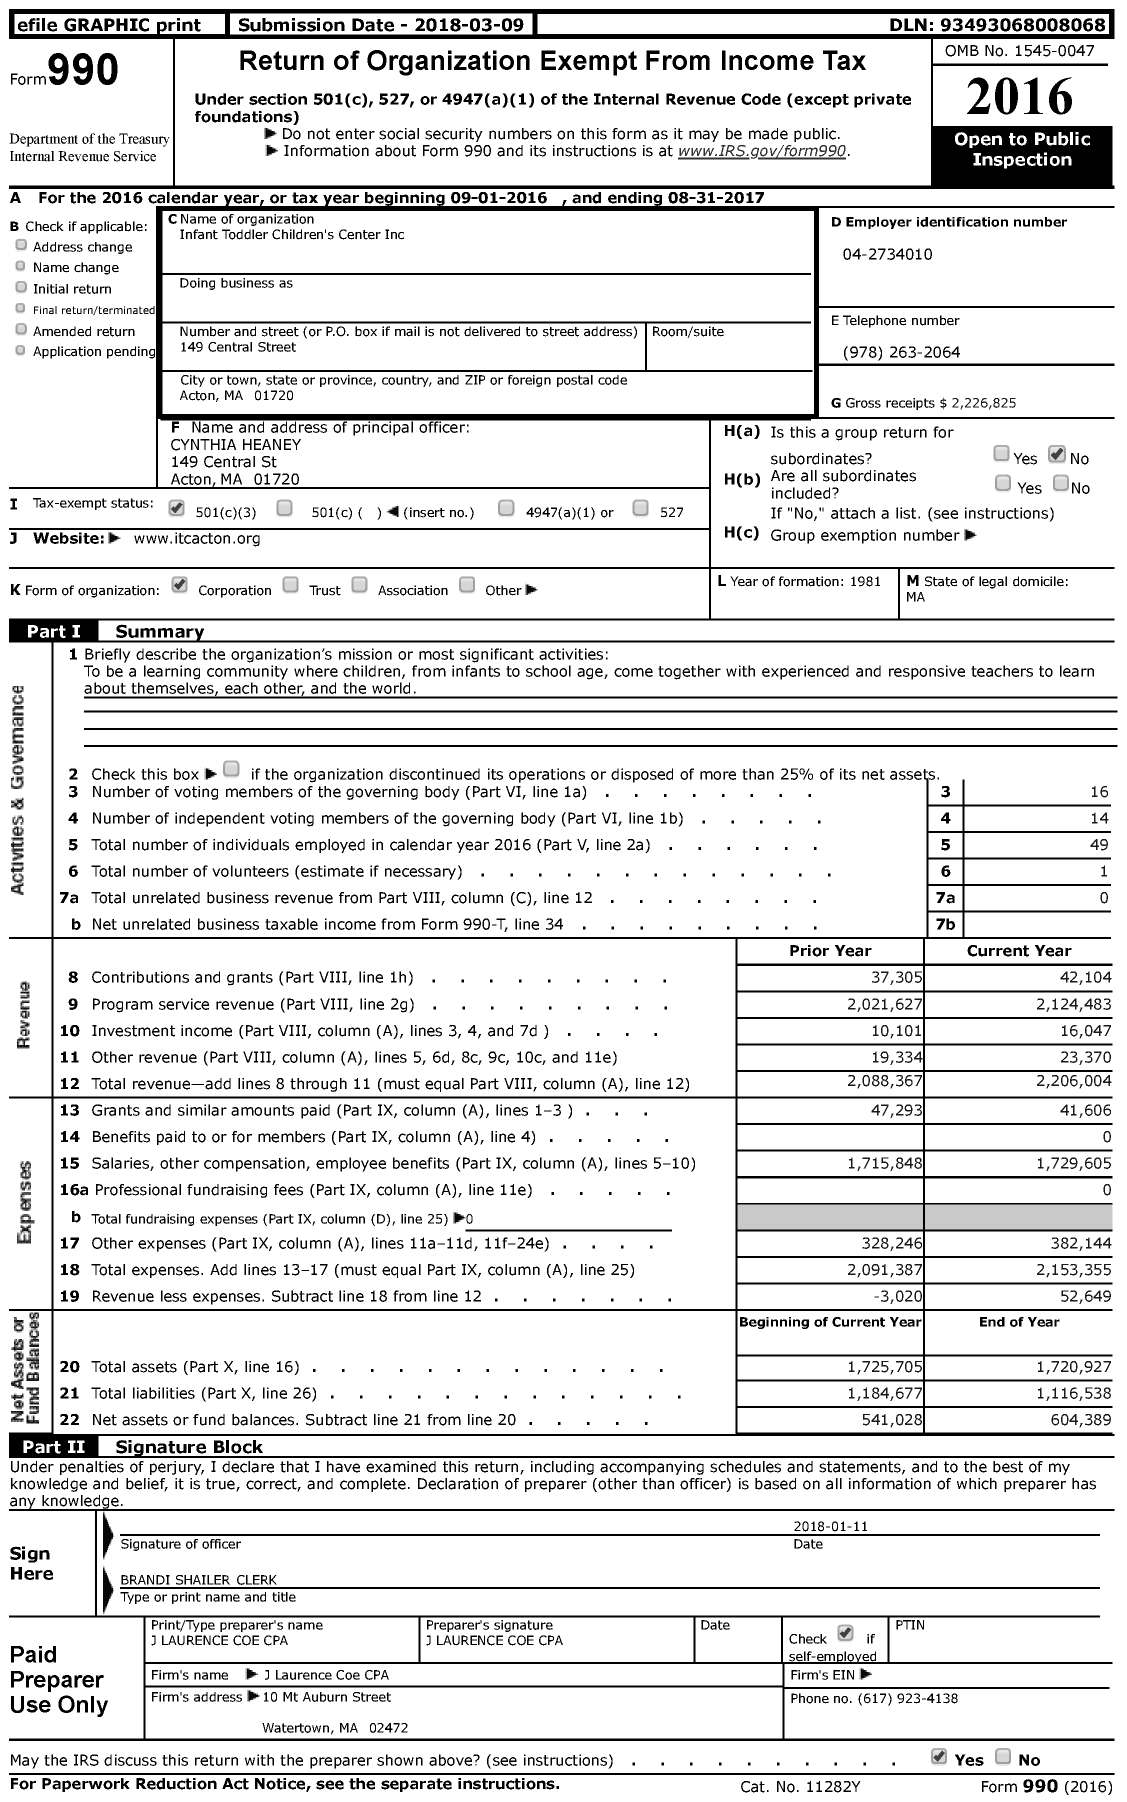 Image of first page of 2016 Form 990 for Infant Toddler Children's Center (ITC)